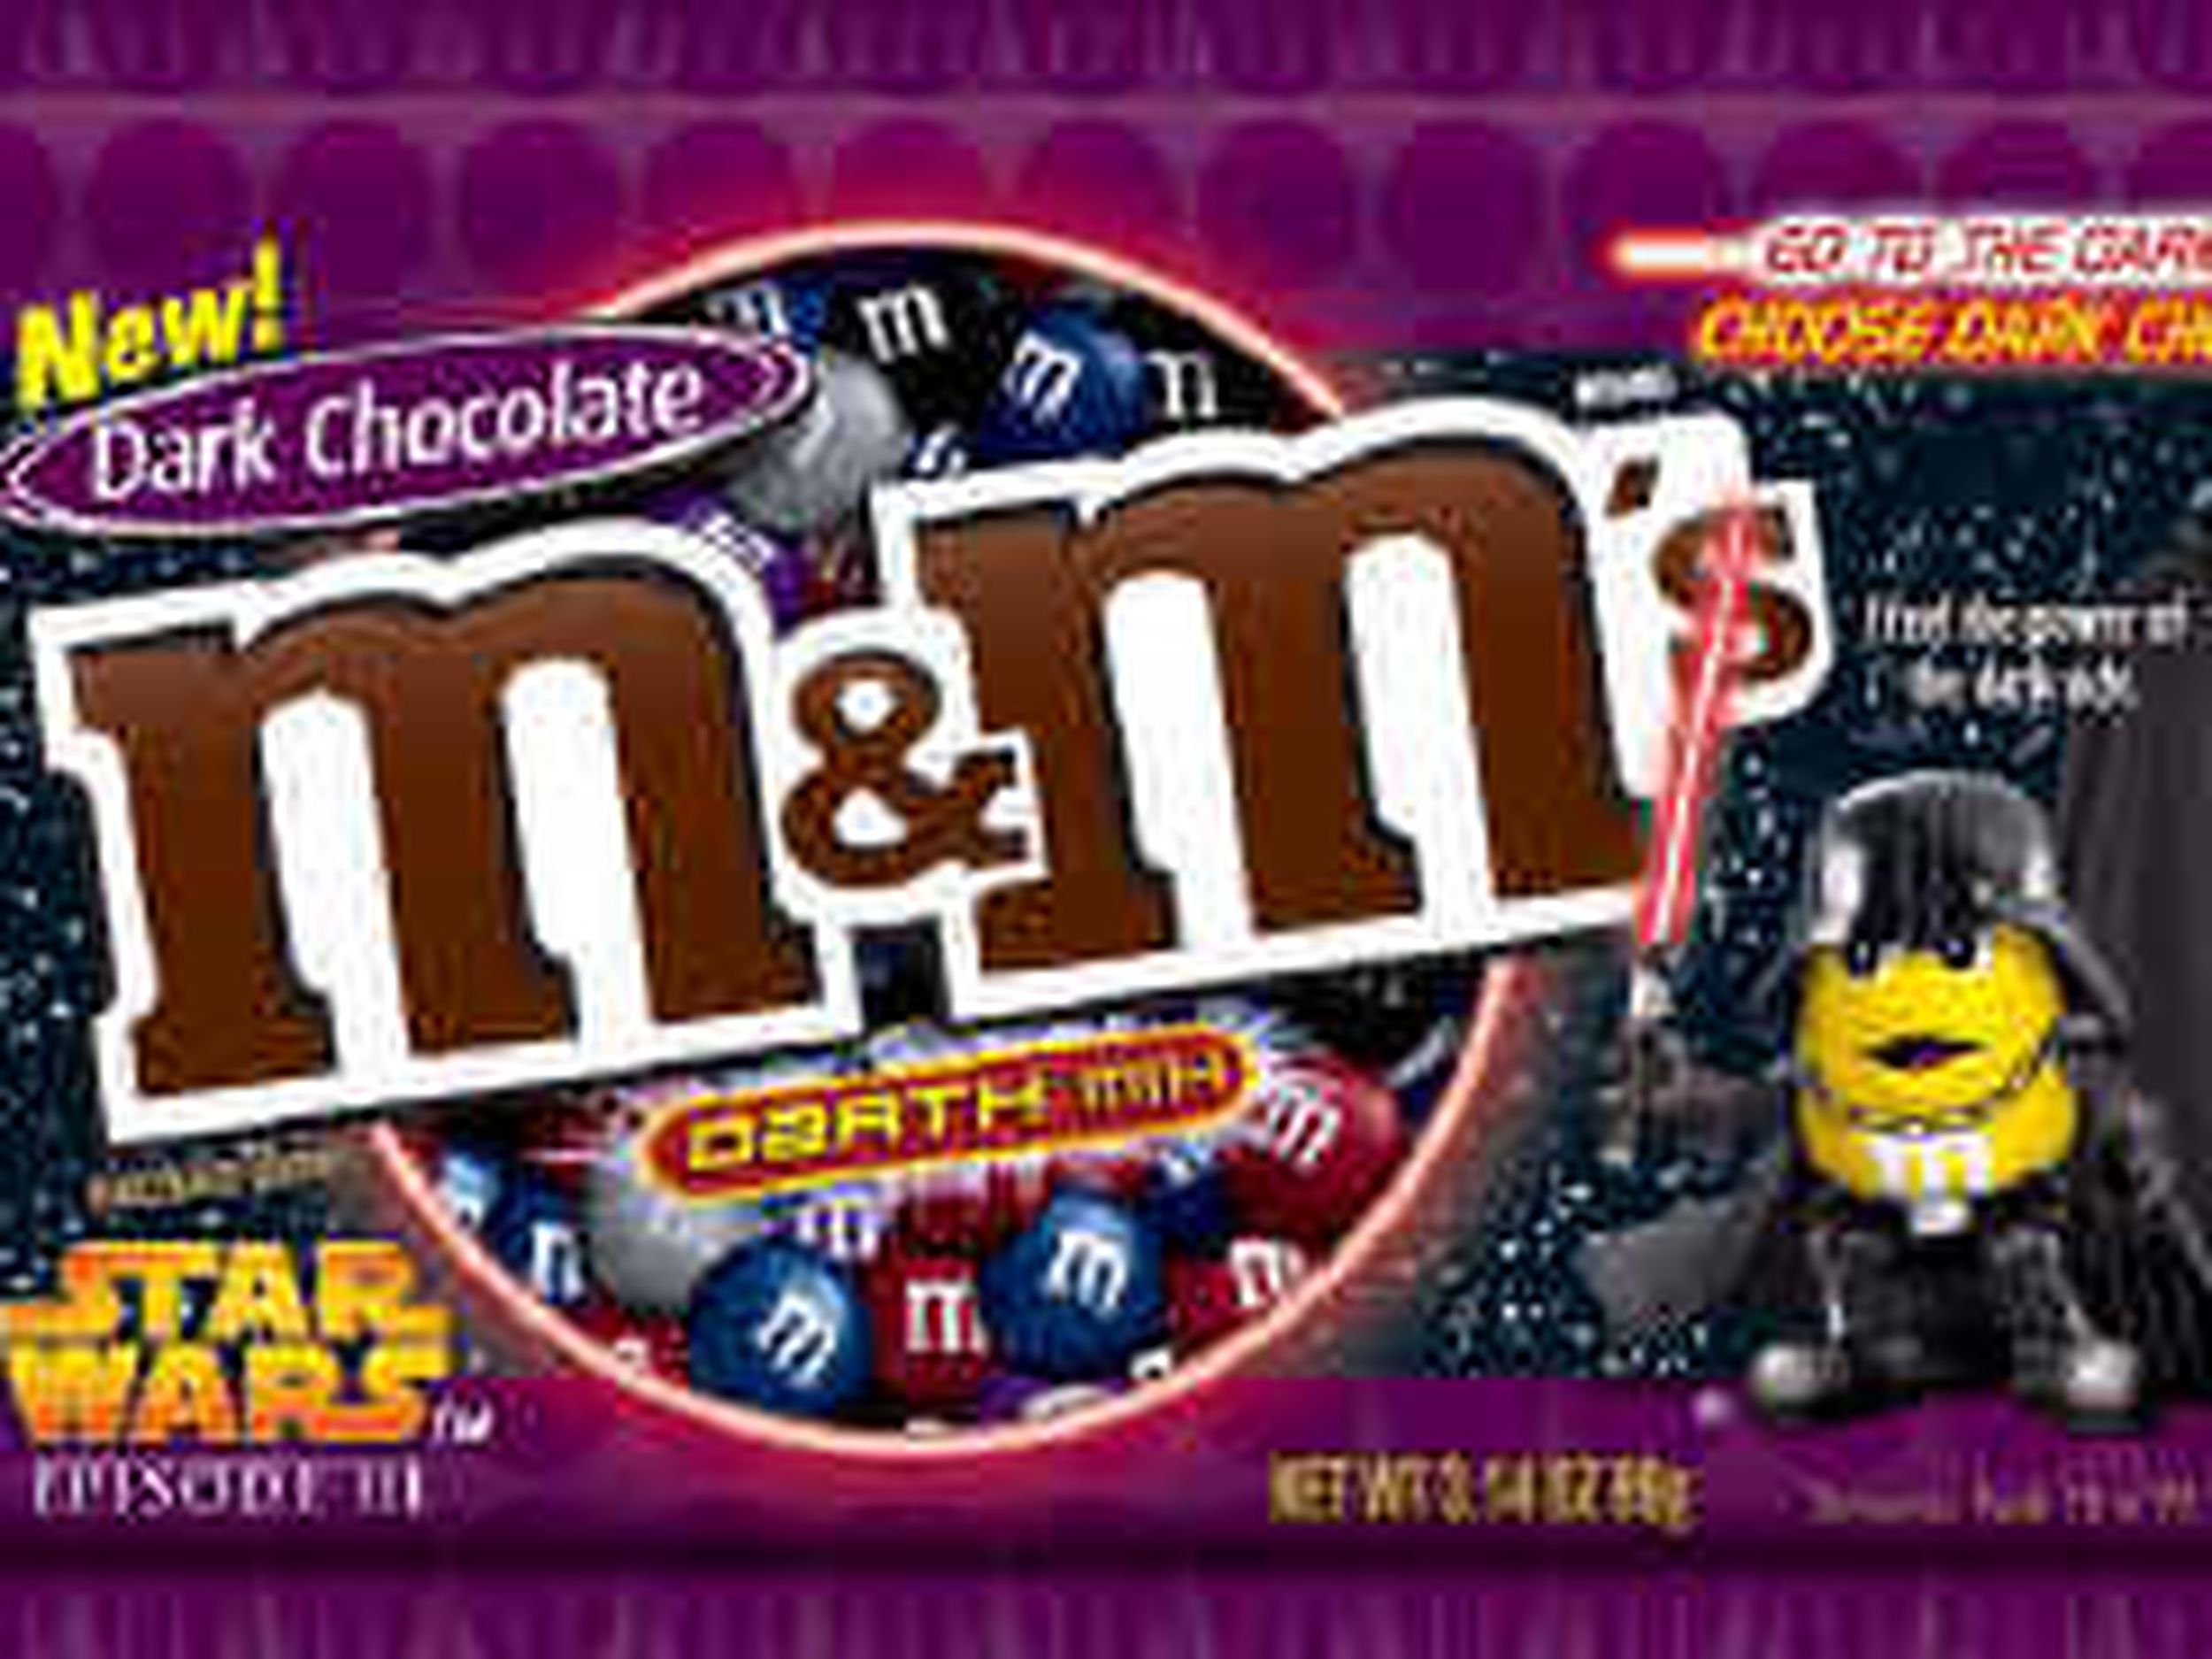 Dark-chocolate Force hits the candy aisle